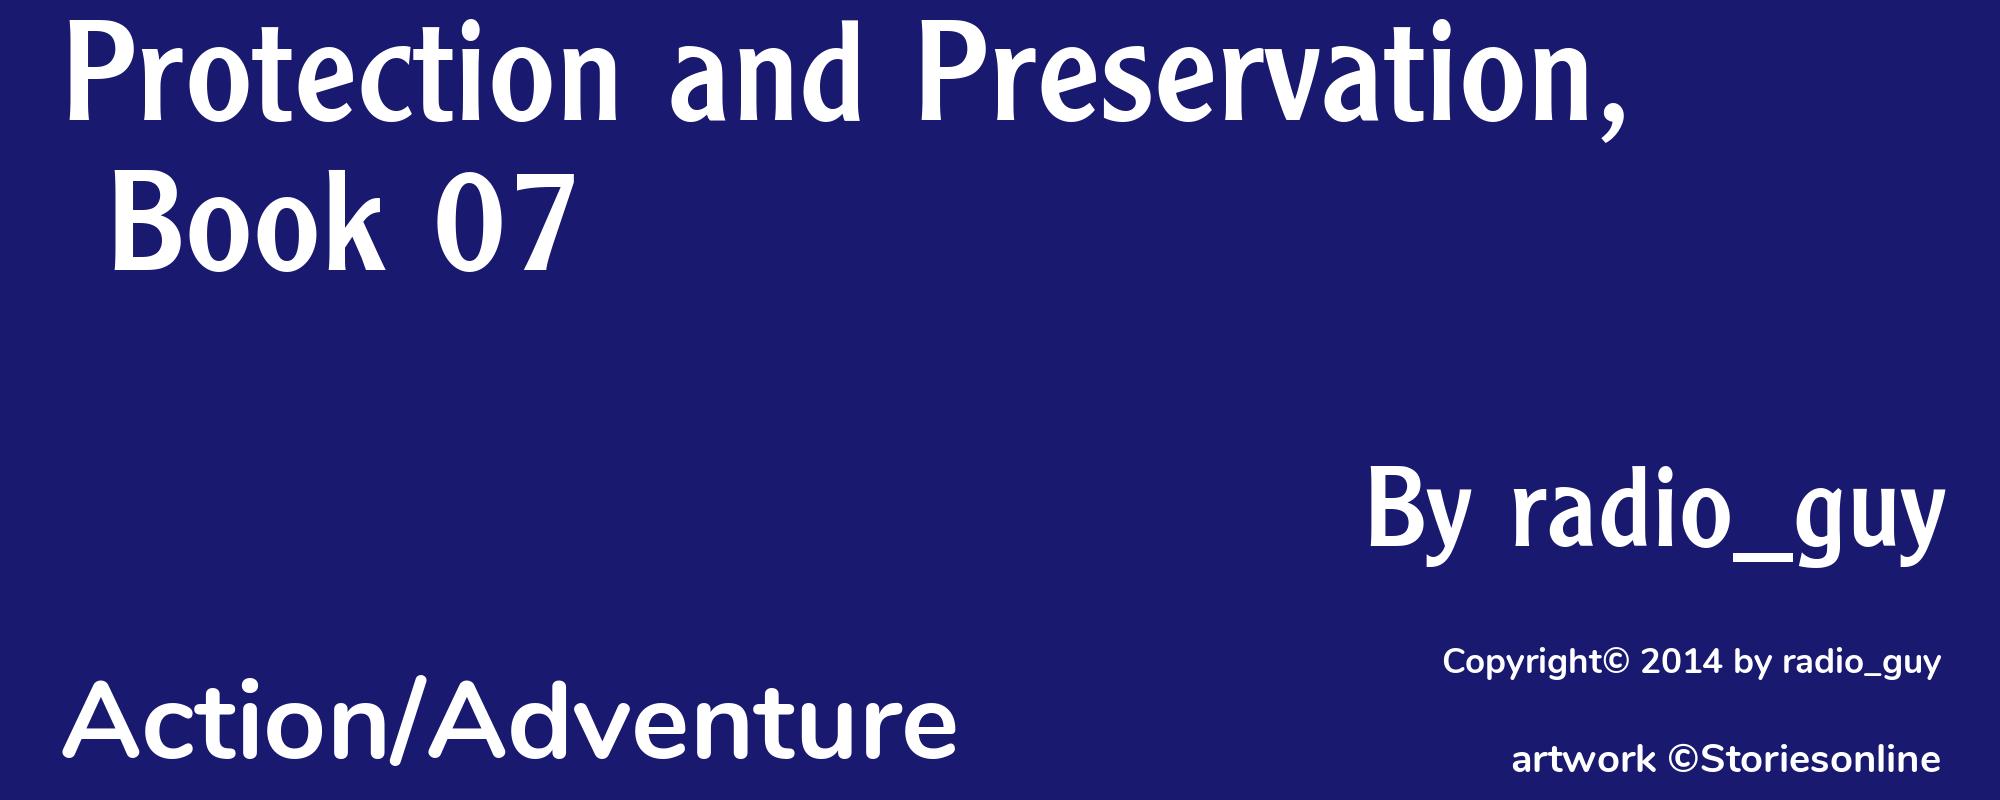 Protection and Preservation, Book 07 - Cover